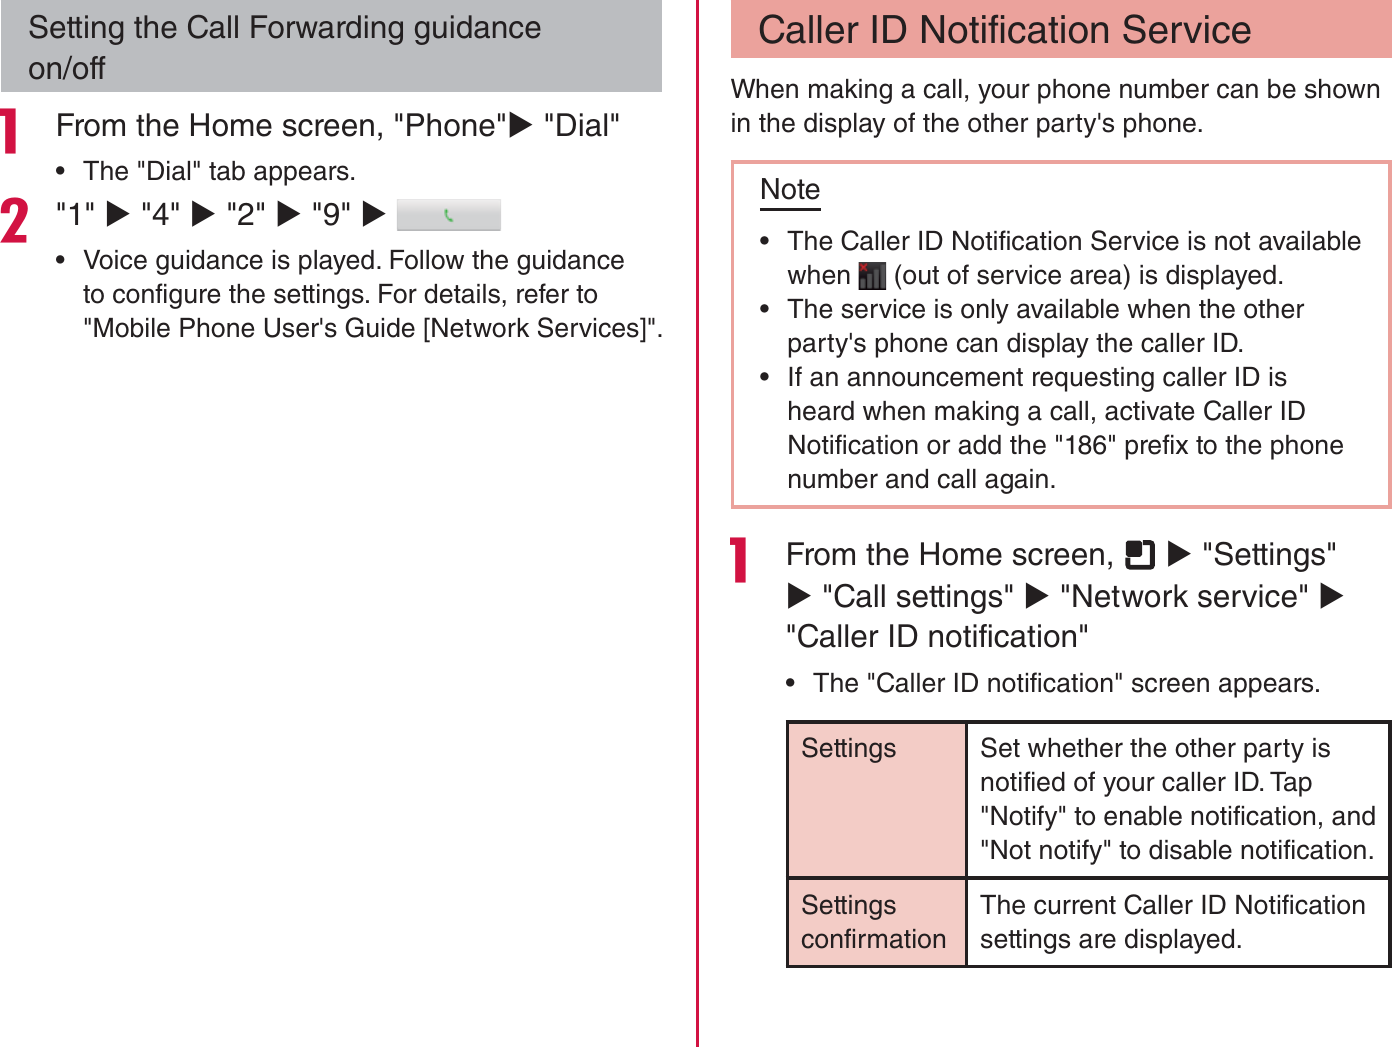 Setting the Call Forwarding guidance on/off From the Home screen, &quot;Phone&quot;X &quot;Dial&quot; rThe &quot;Dial&quot; tab appears.&quot;1&quot; X &quot;4&quot; X &quot;2&quot; X &quot;9&quot; X  rVoice guidance is played. Follow the guidance to configure the settings. For details, refer to &quot;Mobile Phone User&apos;s Guide [Network Services]&quot;.Caller ID Notification ServiceWhen making a call, your phone number can be shown in the display of the other party&apos;s phone.Note rThe Caller ID Notification Service is not available when   (out of service area) is displayed. rThe service is only available when the other party&apos;s phone can display the caller ID. rIf an announcement requesting caller ID is heard when making a call, activate Caller ID Notification or add the &quot;186&quot; prefix to the phone number and call again. From the Home screen,   X &quot;Settings&quot; X &quot;Call settings&quot; X &quot;Network service&quot; X &quot;Caller ID notification&quot; rThe &quot;Caller ID notification&quot; screen appears.Settings Set whether the other party is notified of your caller ID. Tap &quot;Notify&quot; to enable notification, and &quot;Not notify&quot; to disable notification.Settings confirmationThe current Caller ID Notification settings are displayed.98Calling / Network Services